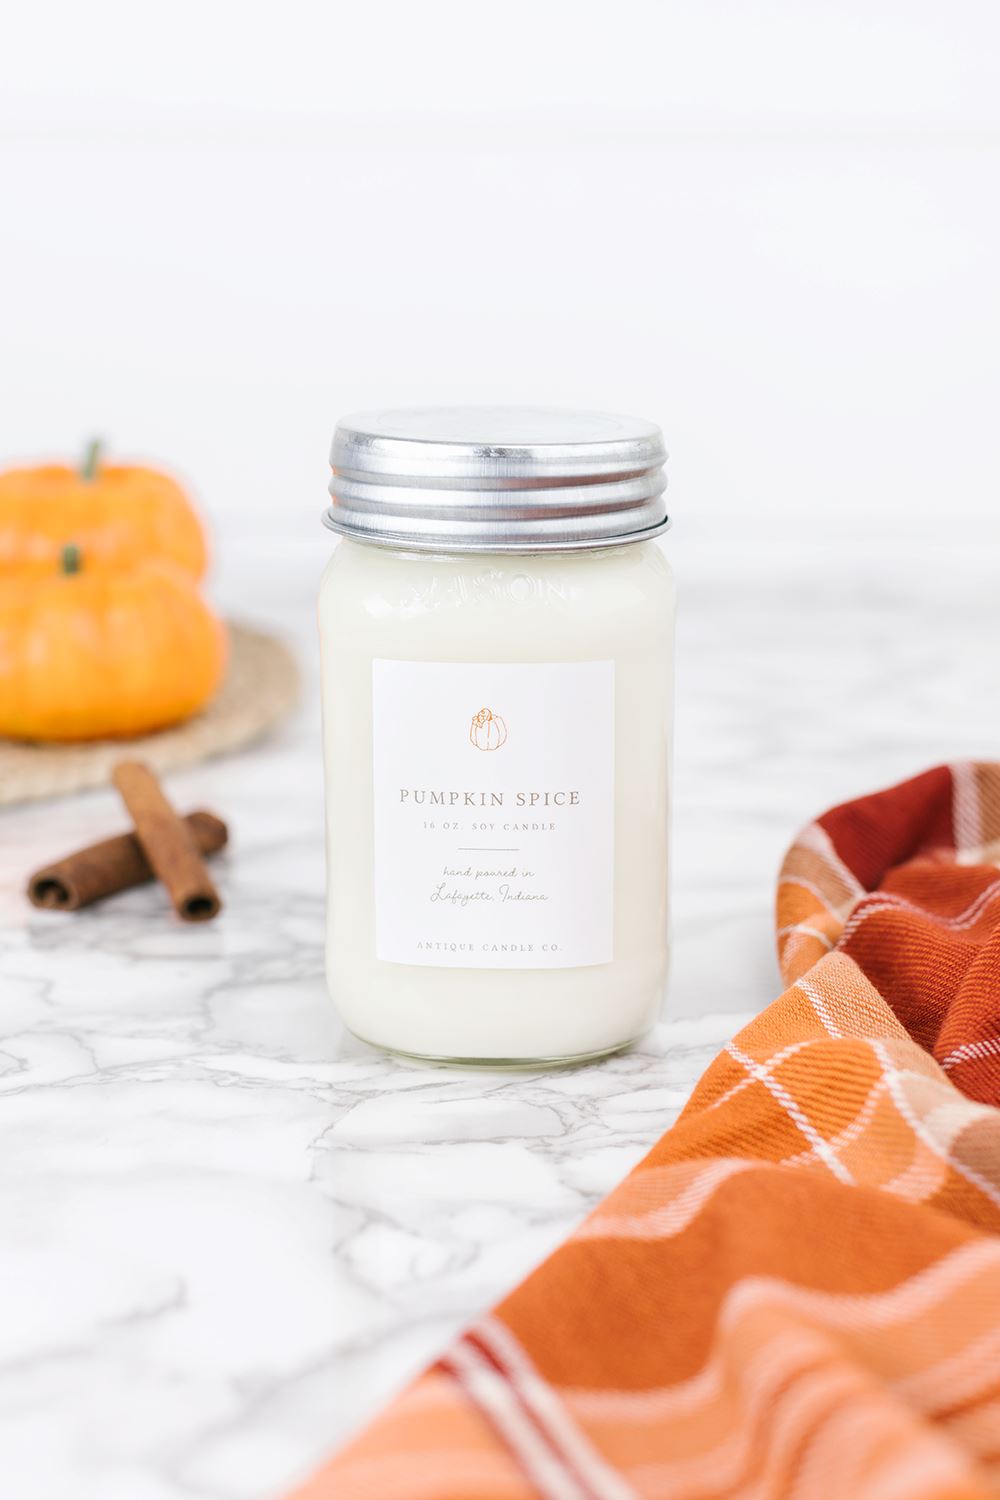 Pumpkin Spice Candle by Antique Candle Co® Candles antique candle co 